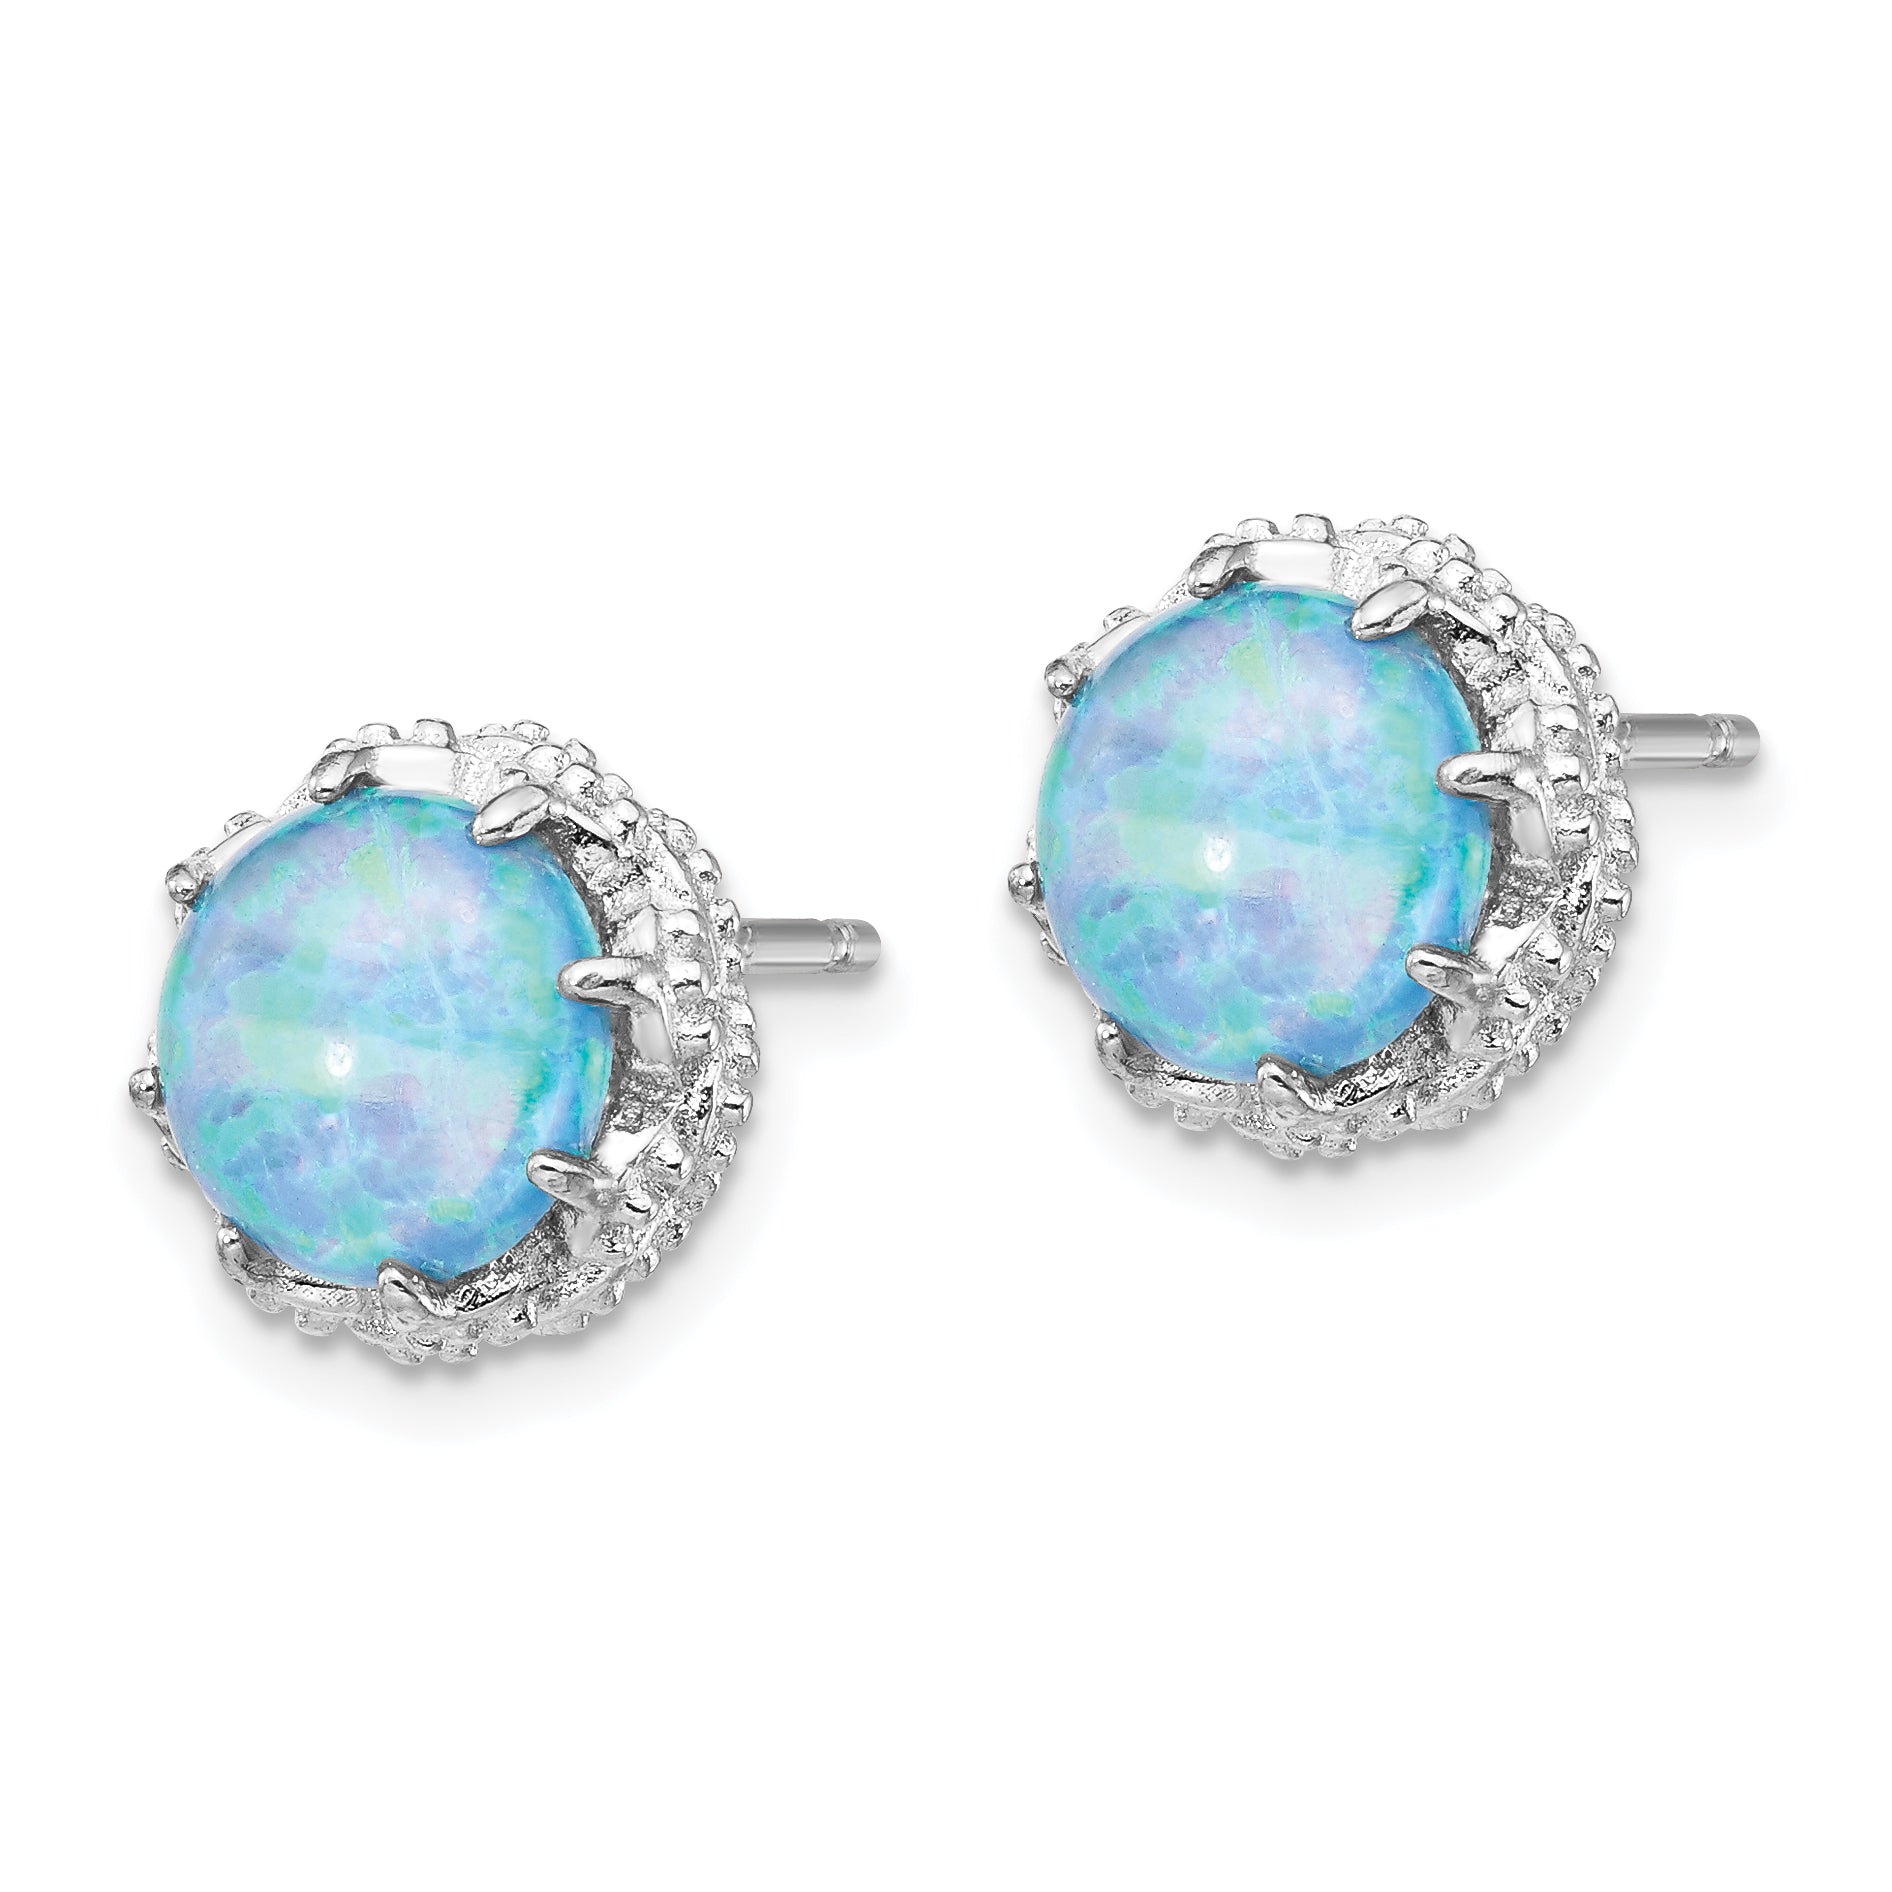 Cheryl M Sterling Silver Rhodium-plated Cabochon Lab Created Blue Opal and Brilliant-cut CZ Post Earrings